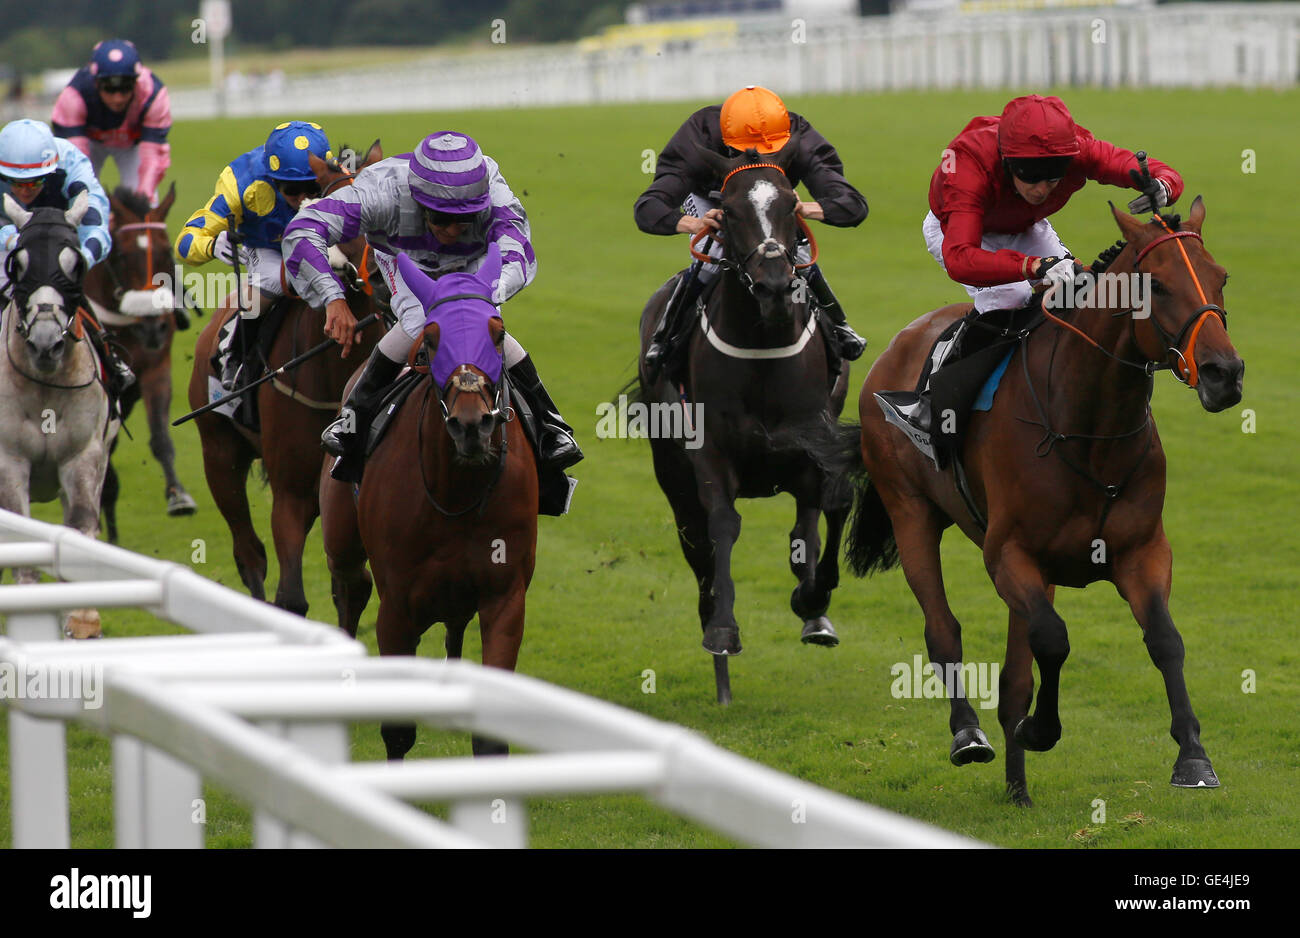 Sea of Heaven ridden by Luke Morris (right) leads the field home to win The John Guest Brown Jack Stakes Race run during day one of the King George VI Weekend at Ascot Racecourse. PRESS ASSCOCIATION Photo. Picture date: Friday July 22, 2016. See PA story Racing Ascot. Photo credit should read: Julian Herbert/PA Wire. RESTRICTIONS: Use subject to restrictions. Editorial use only, no commercial or promotional use. No private sales. Call +44 (0)1158 447447 for further information. Stock Photo